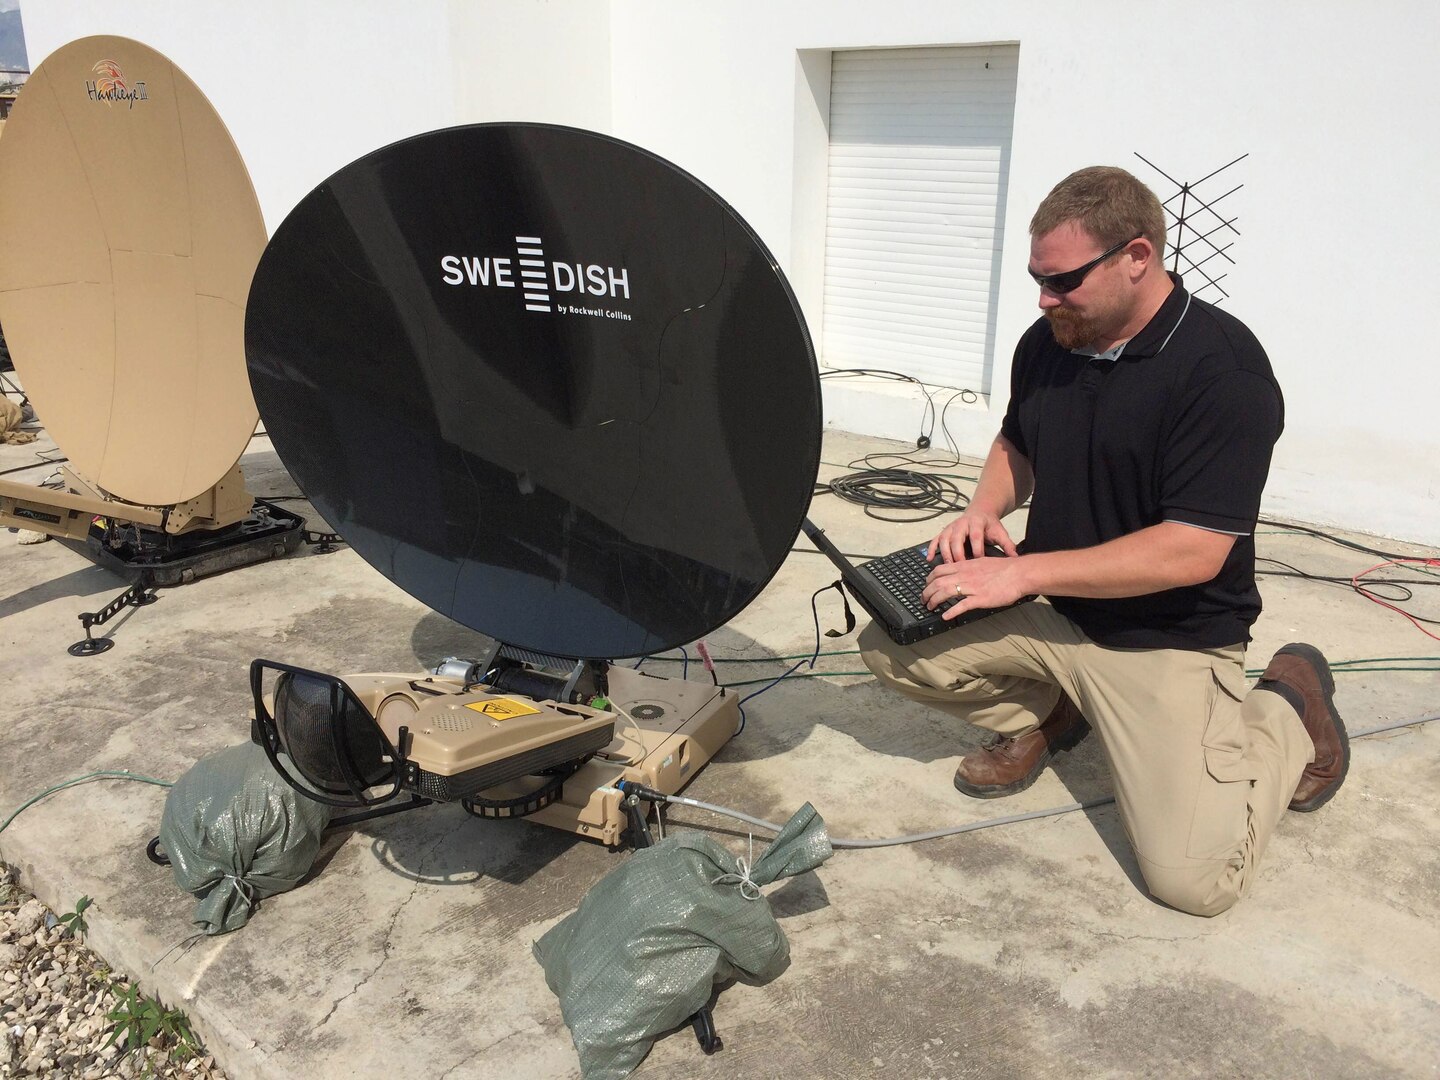 Mark Bossen, a contingency information technology specialist in DLA Information Operations, sets up the system relied on by members of JTF Matthew to communicate between the base location and field sites, as well as DLA Headquarters.